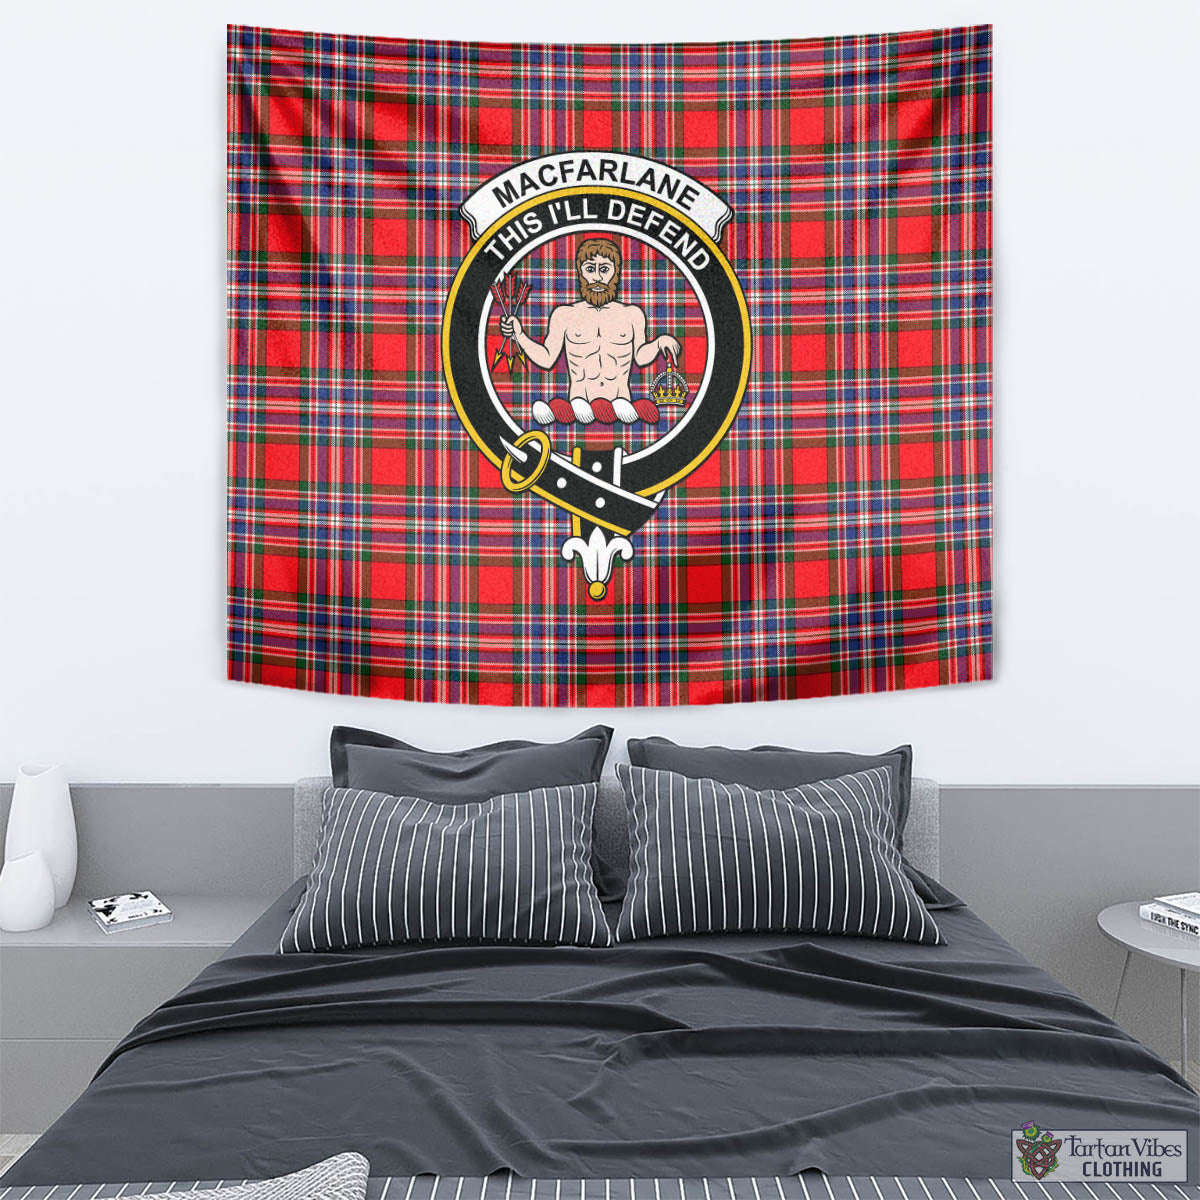 Tartan Vibes Clothing MacFarlane Modern Tartan Tapestry Wall Hanging and Home Decor for Room with Family Crest